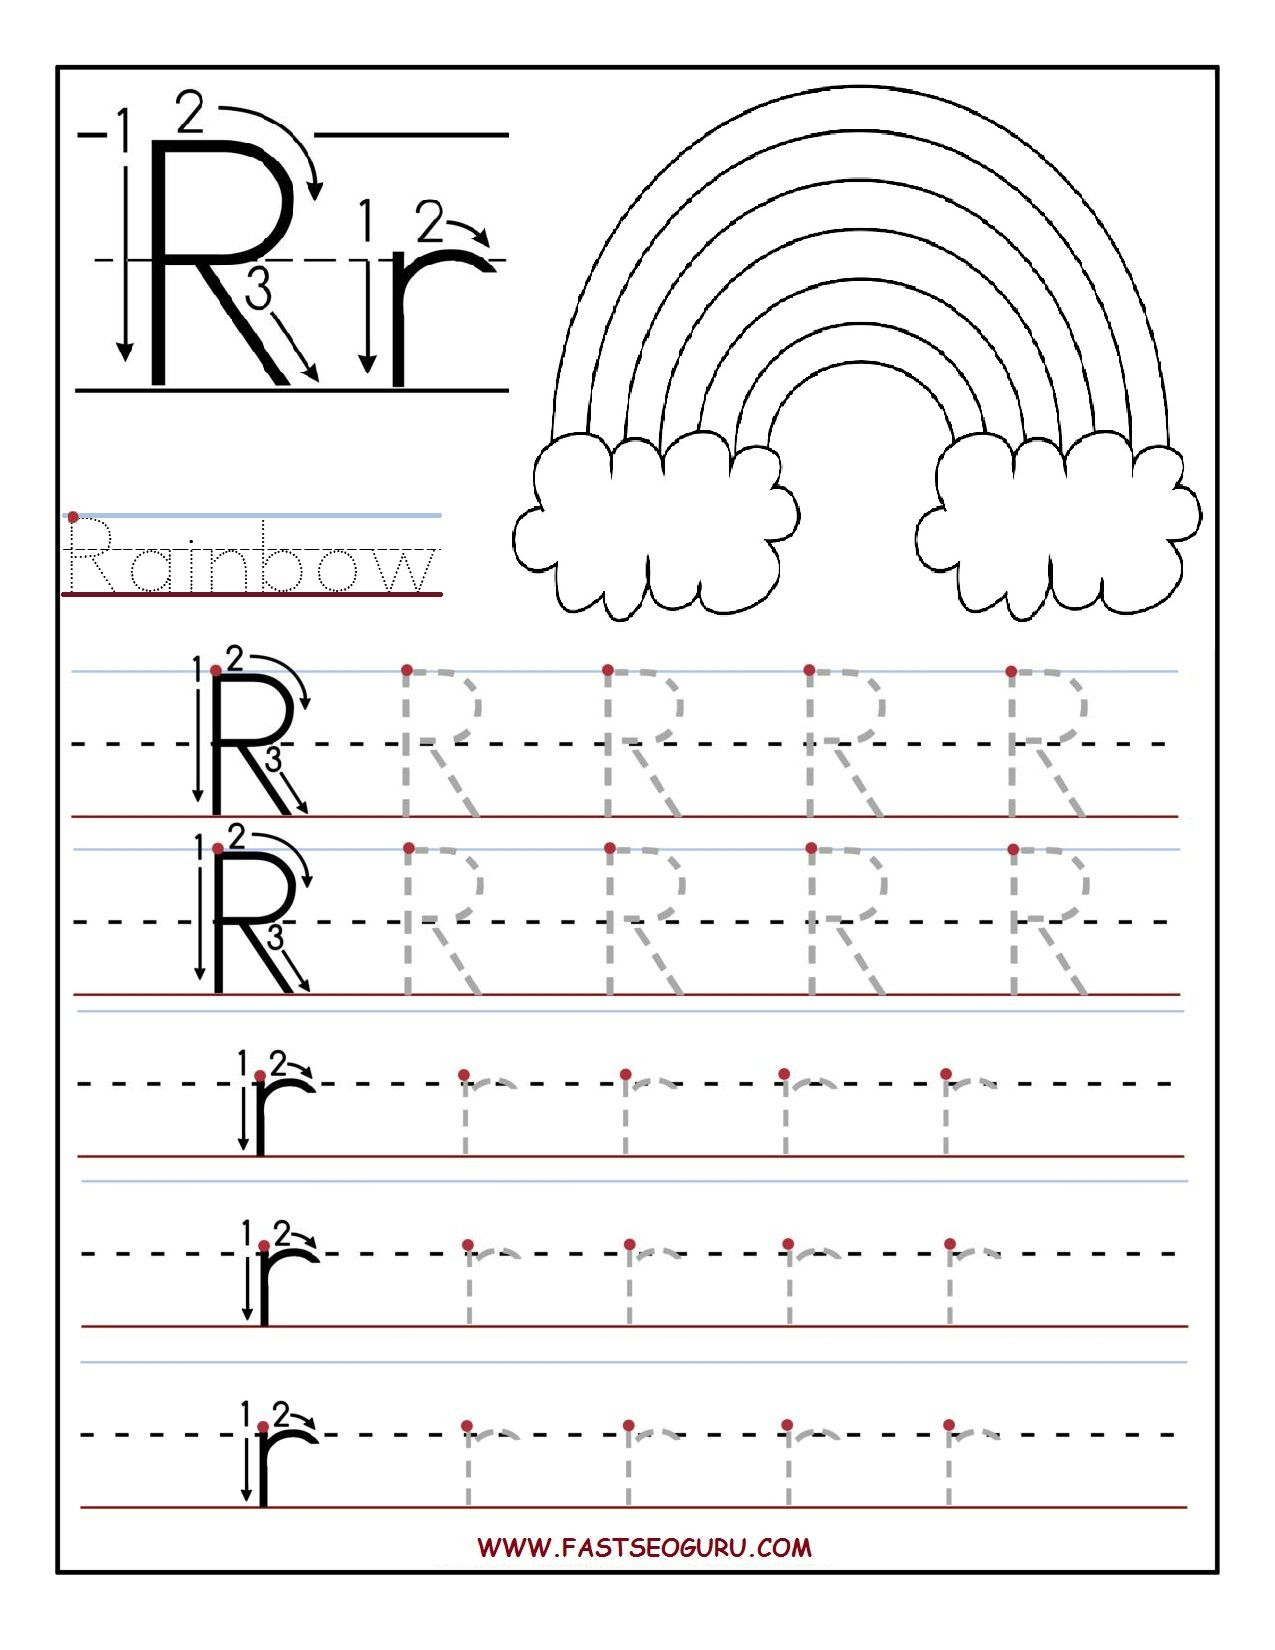 Printable Letter R Tracing Worksheets For Preschool throughout Letter Tracing Activity Worksheets